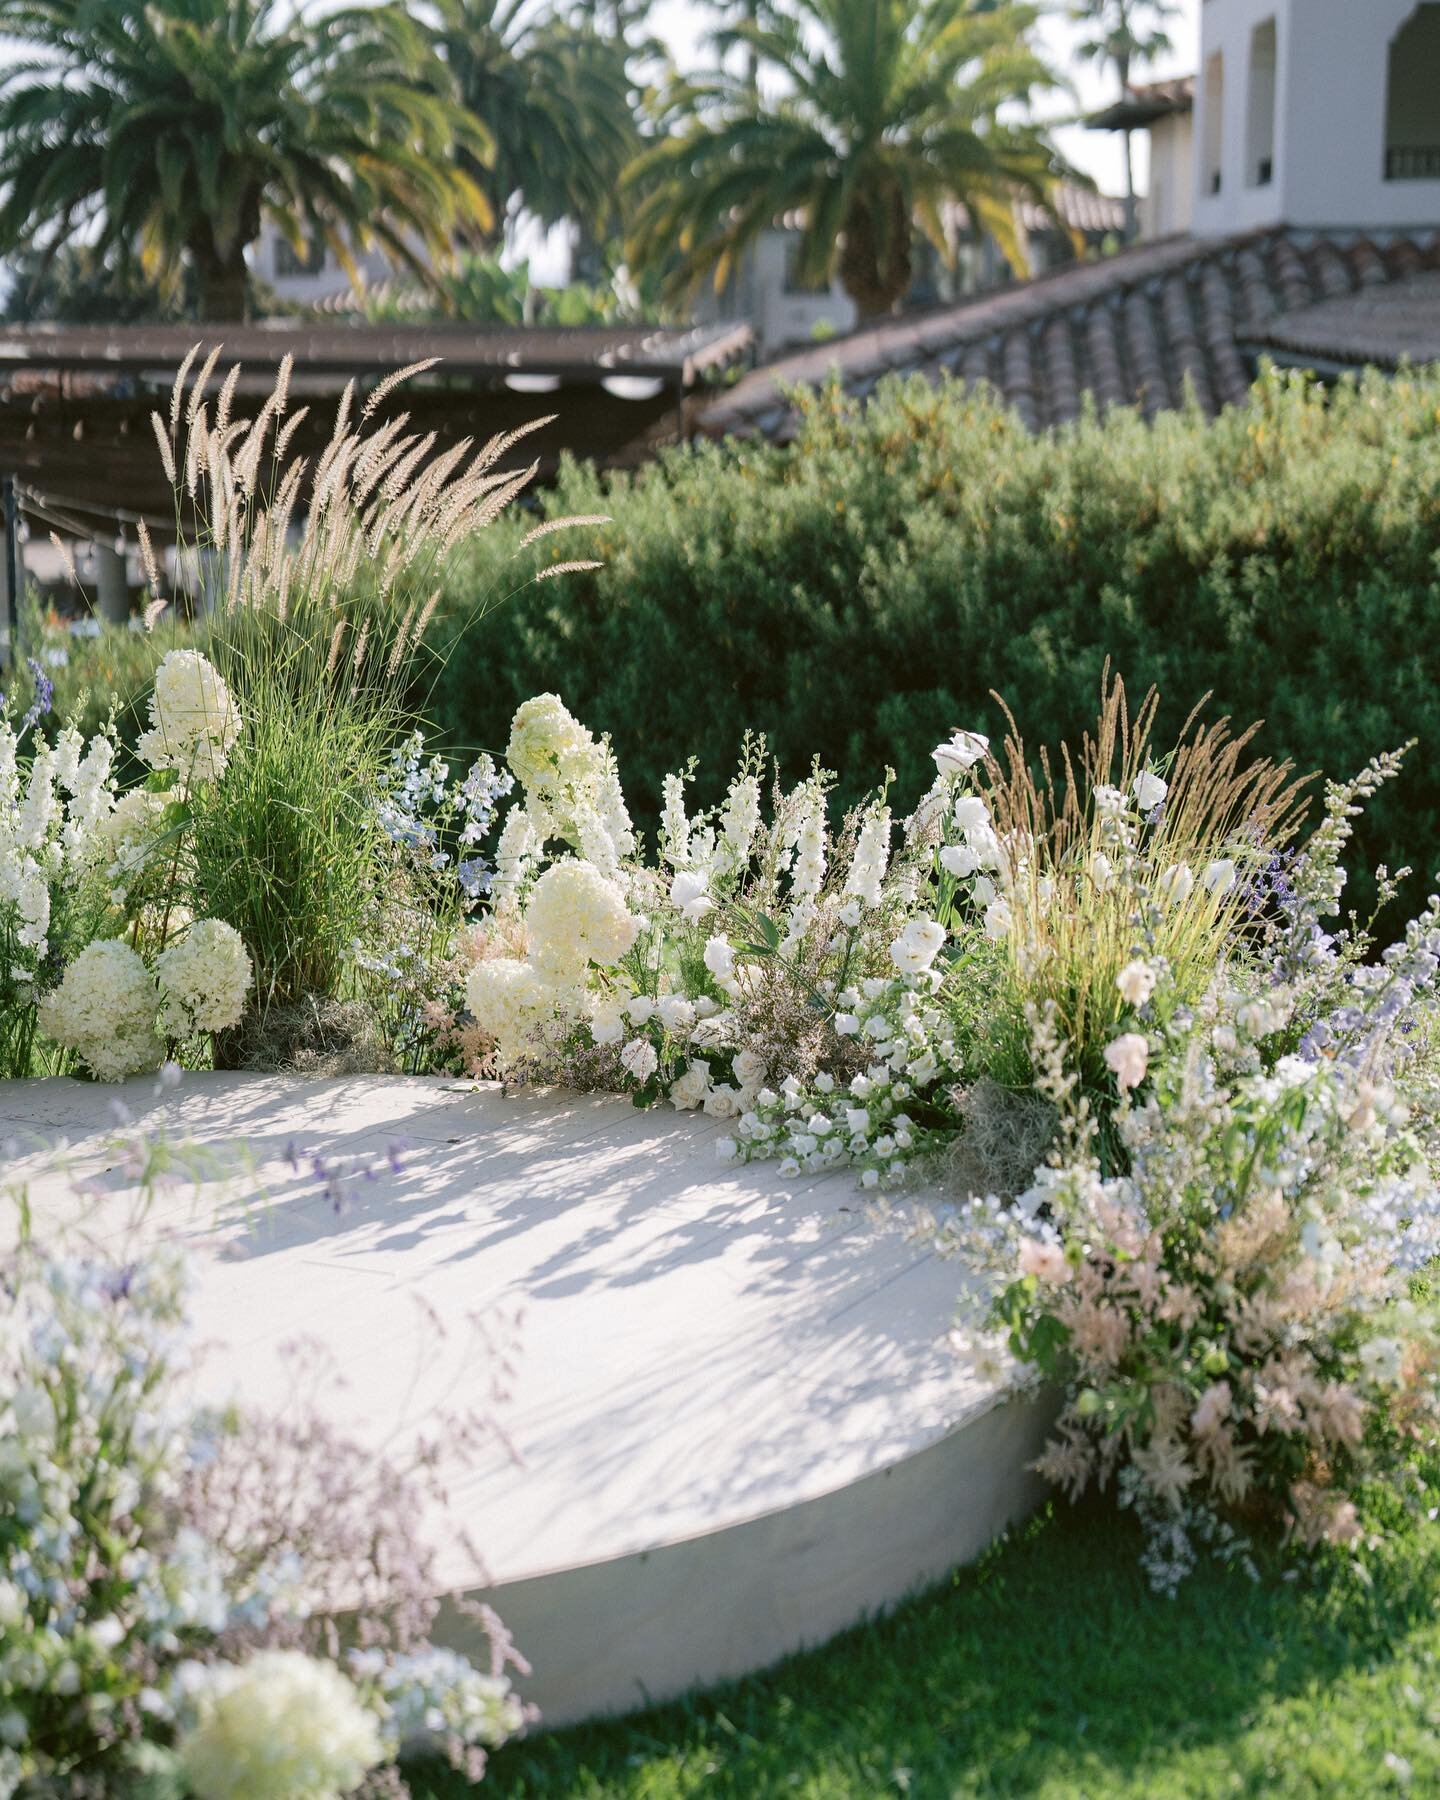 When we were creating Kelley &amp; Ben&rsquo;s wedding aesthetic words of design reference included Coastal Chic, Timeless, and Fun. 🌊 Swipe to see their oceanside ceremony at @ritzcarltonbacarasb photographed by @michellebeller.

Event Design &amp;